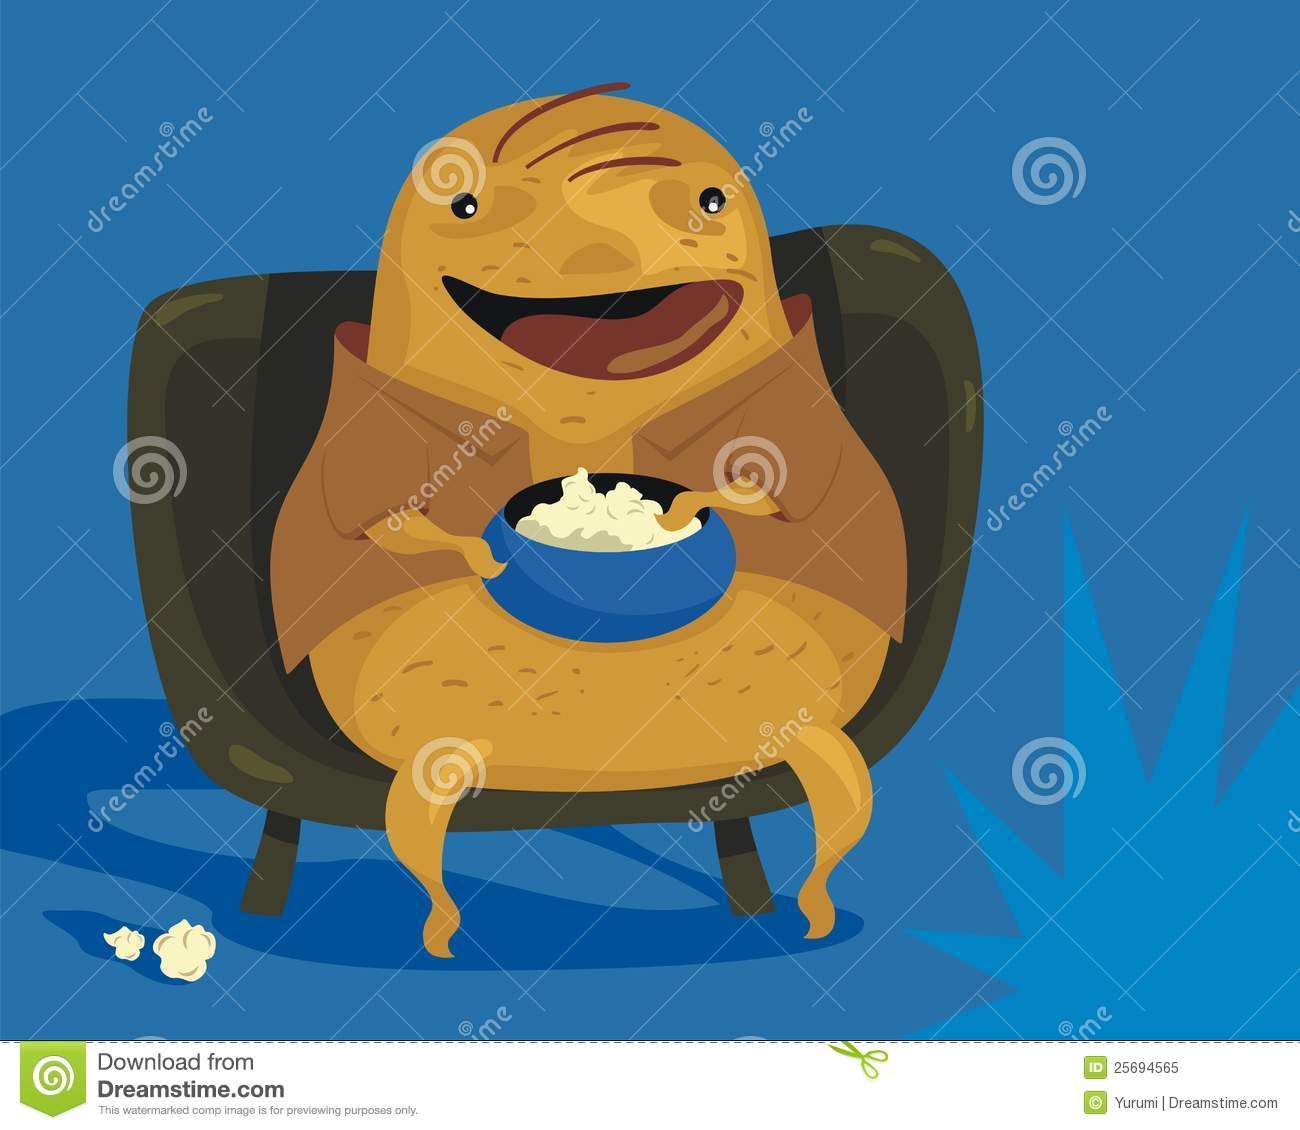 Couch Potato Royalty Free Stock Photo   Image  25694565